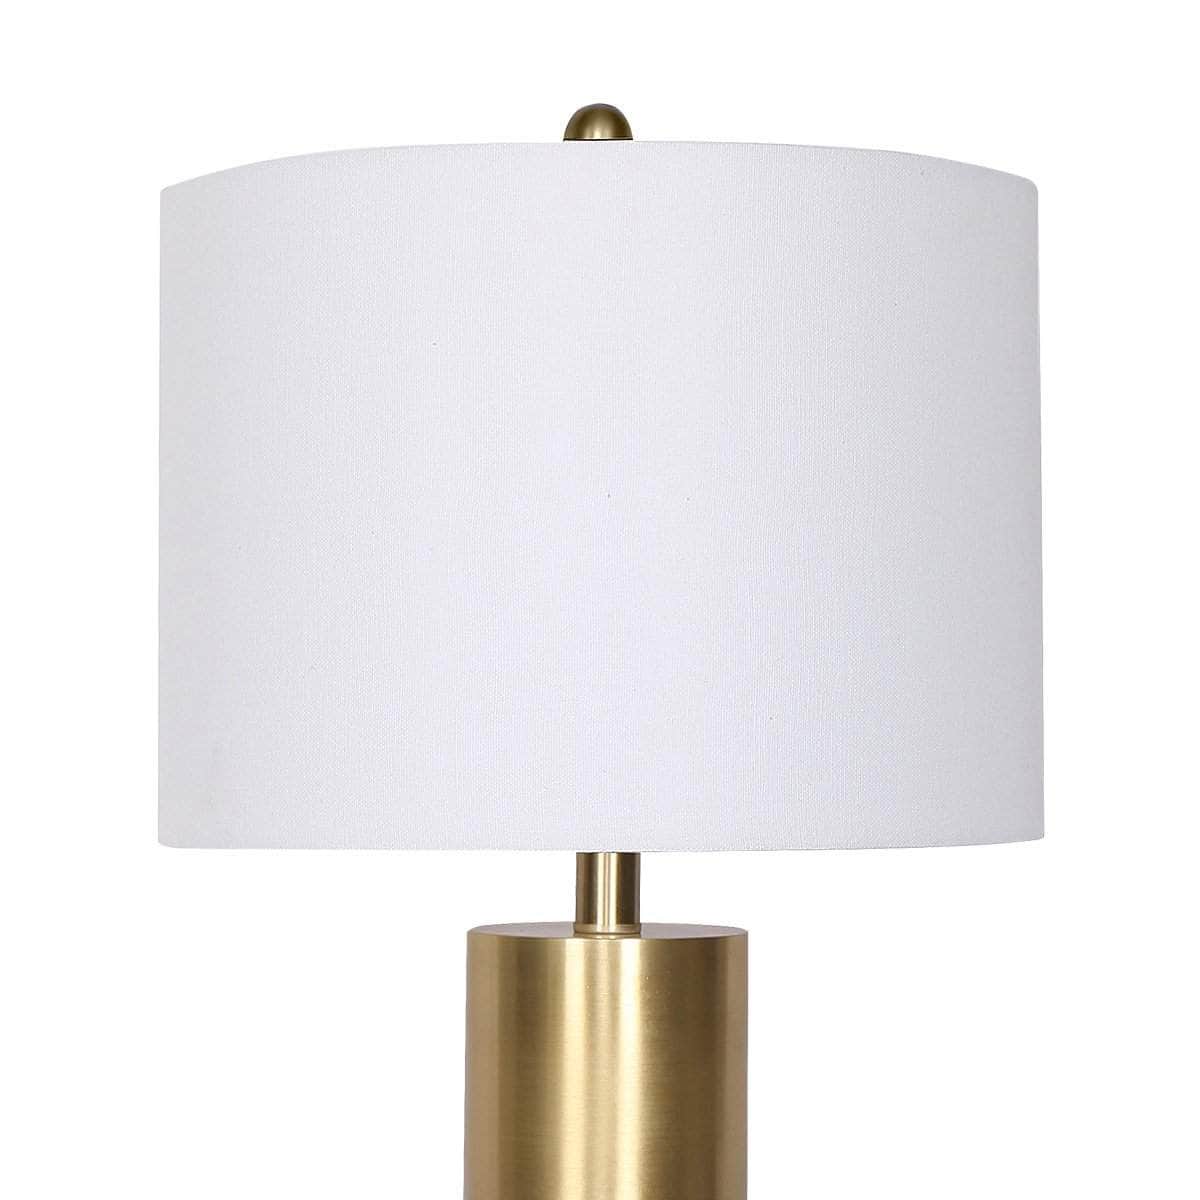 Modern Simplicity: White Metal and Marble Table Lamp